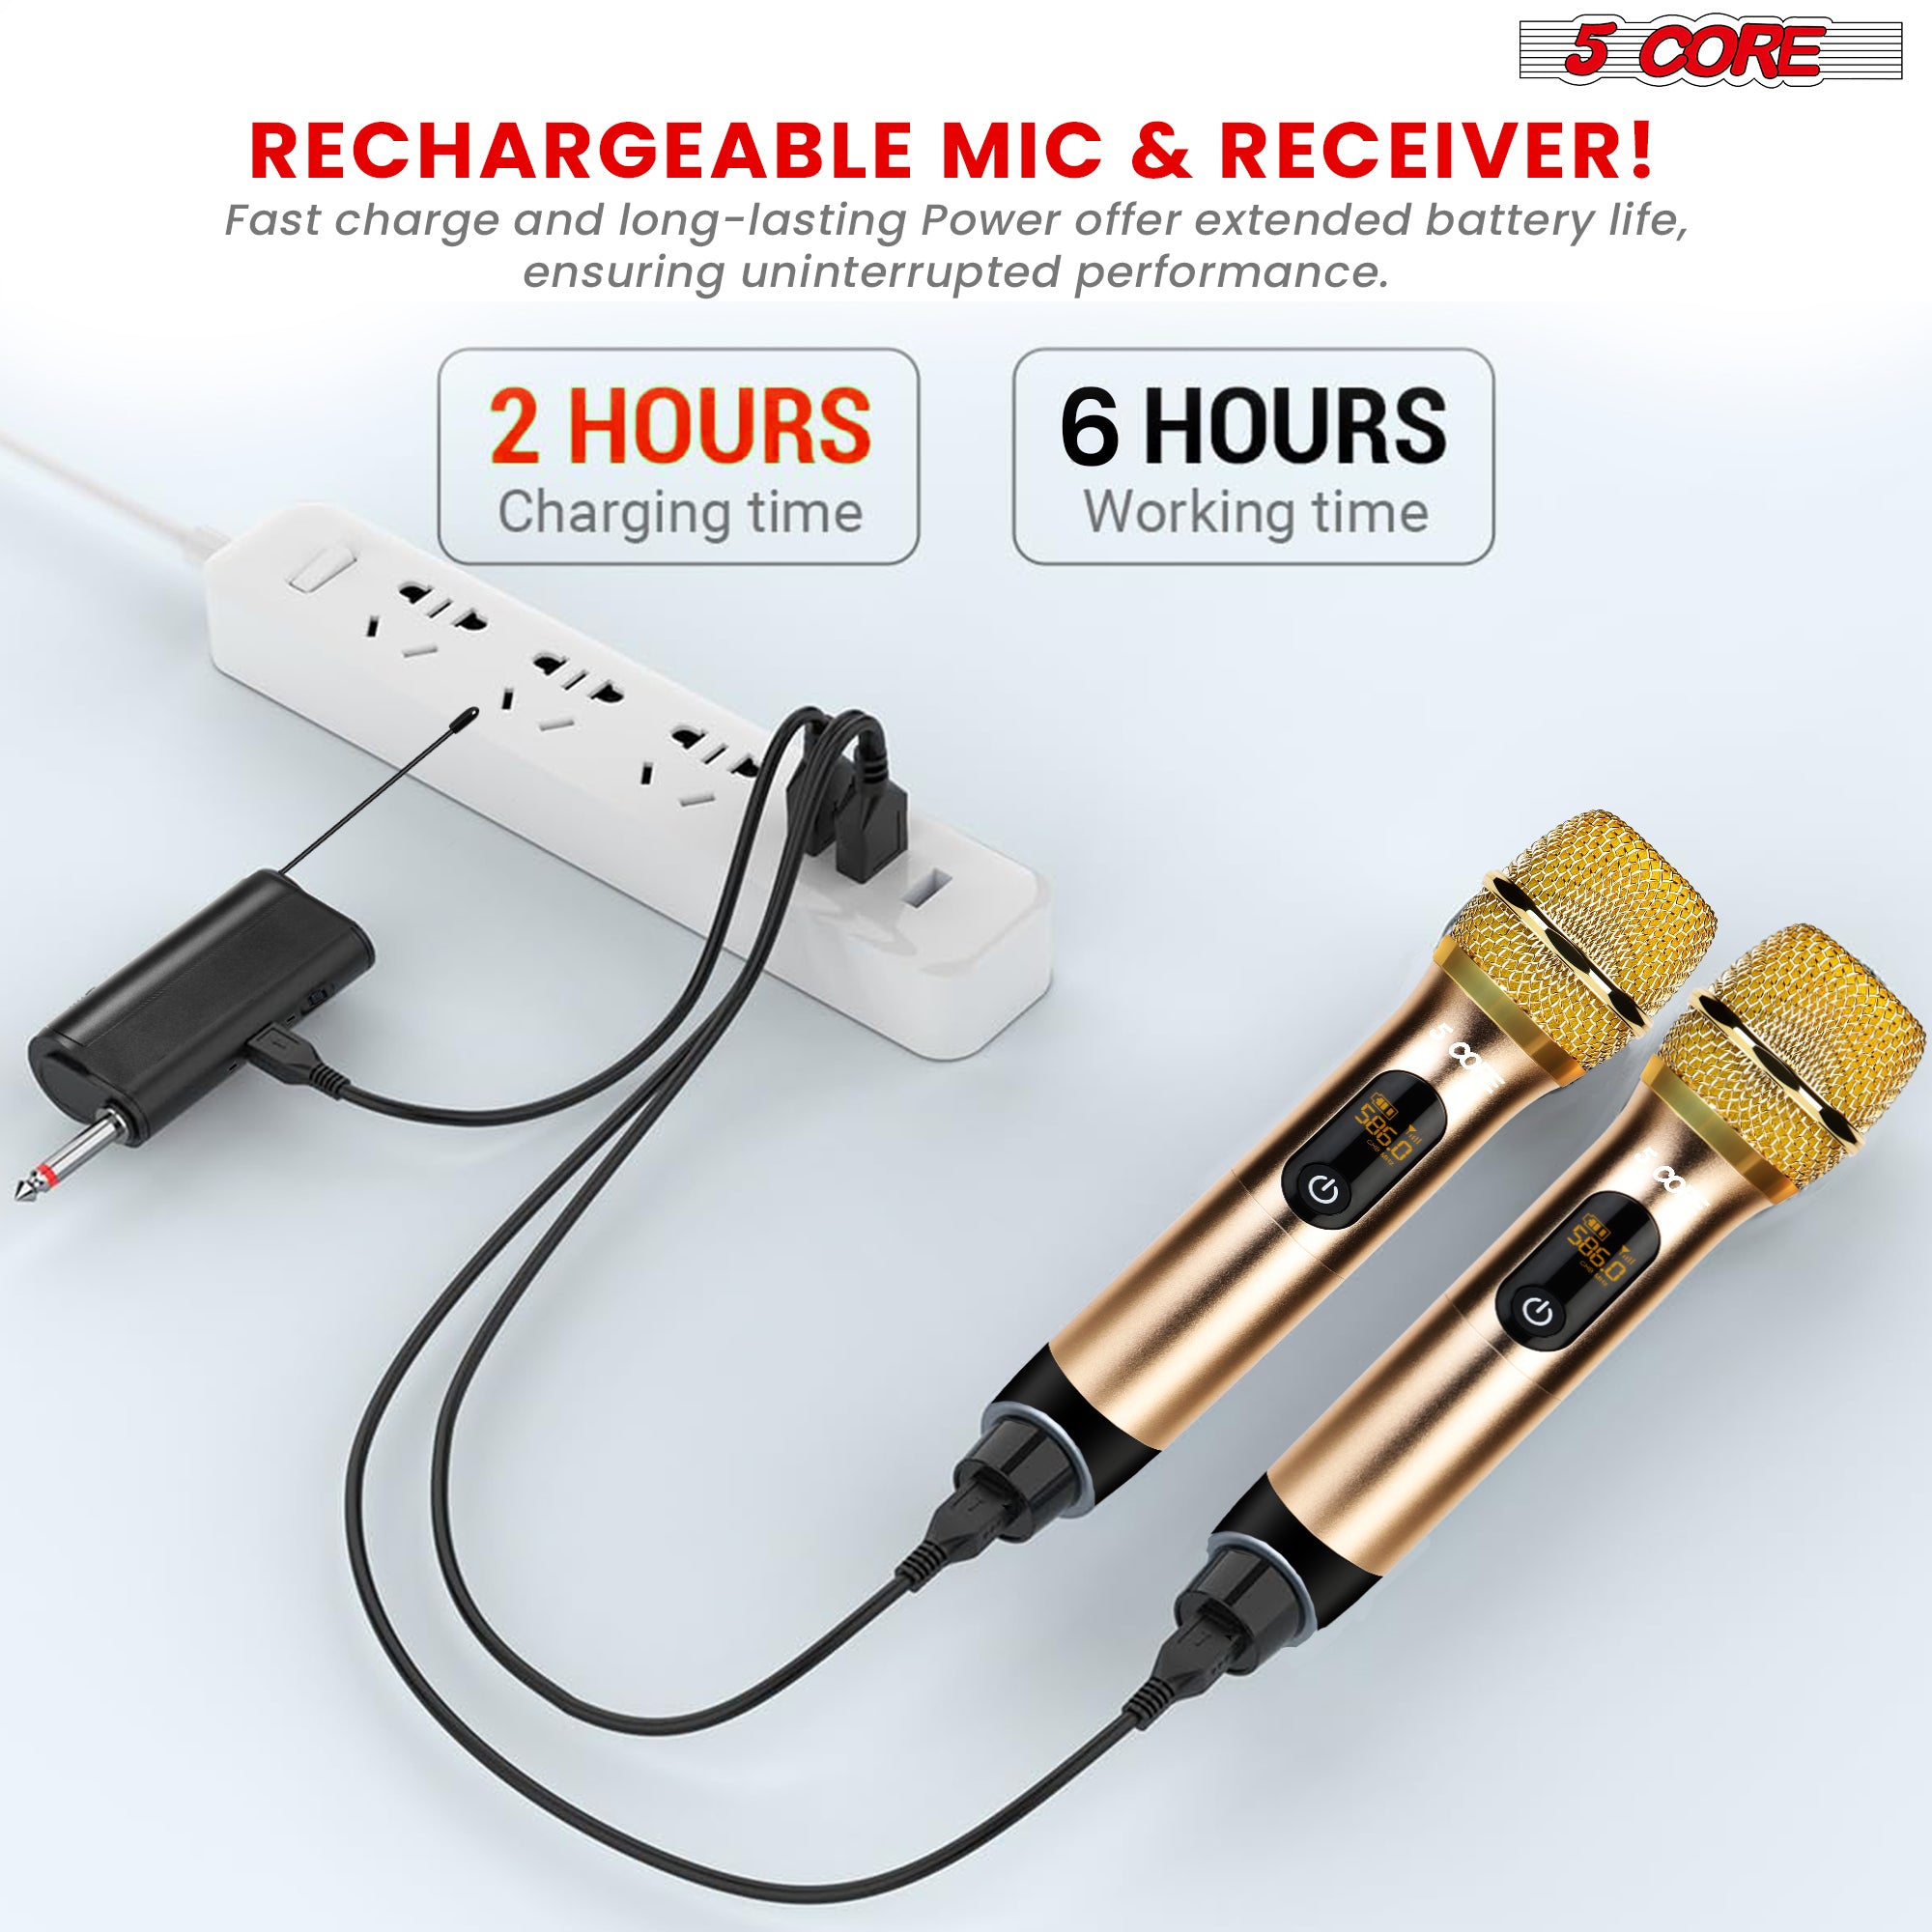 rechargeable mic & reciever